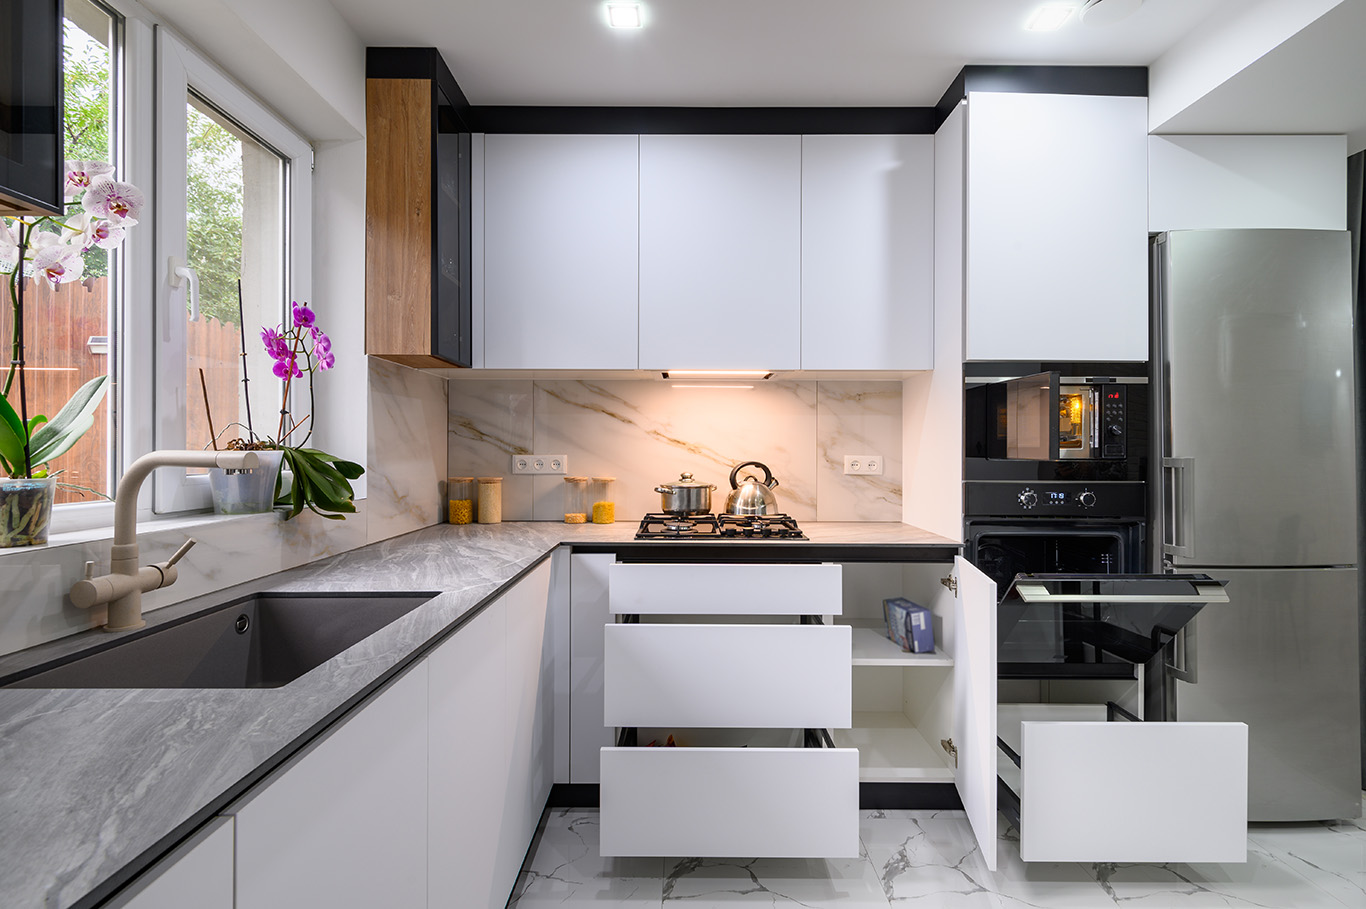 A bright and airy kitchen with a white, modern design, a luxurious marble floor, an open oven door, and pull-out shelves for easy access to ingredients and appliances